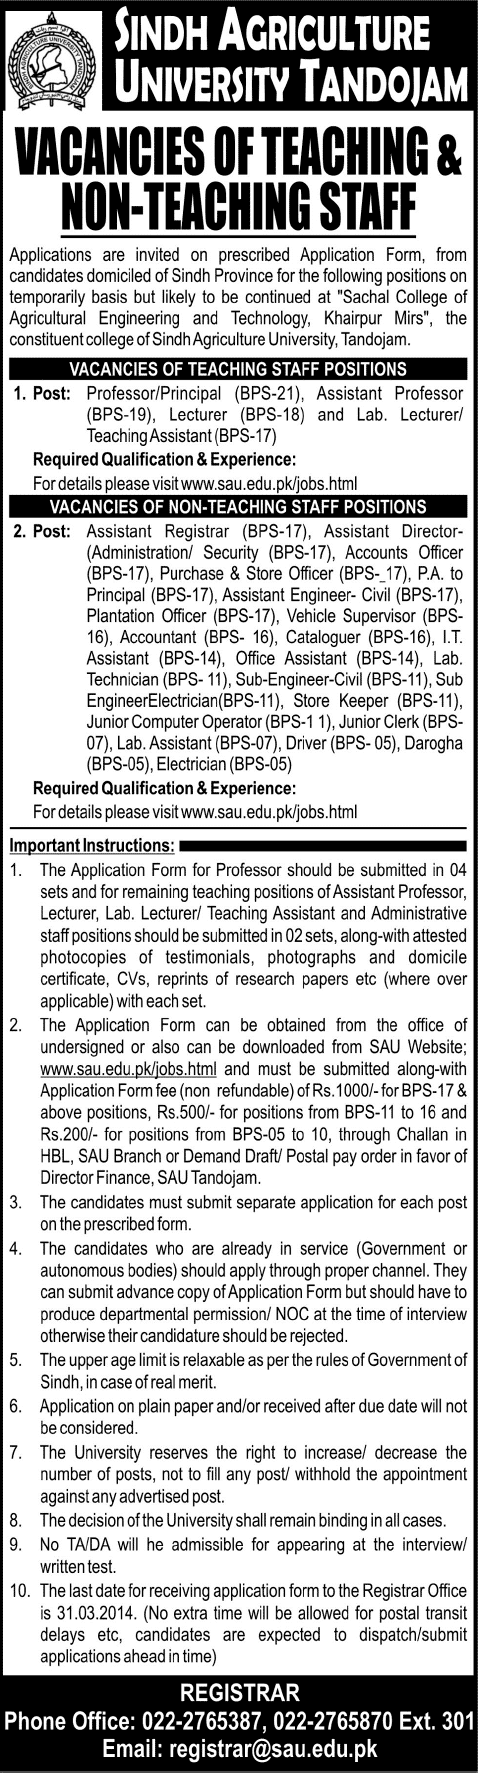 Sindh Agriculture University - Sachal College Jobs 2014 March for Teaching & Non-Teaching Staff